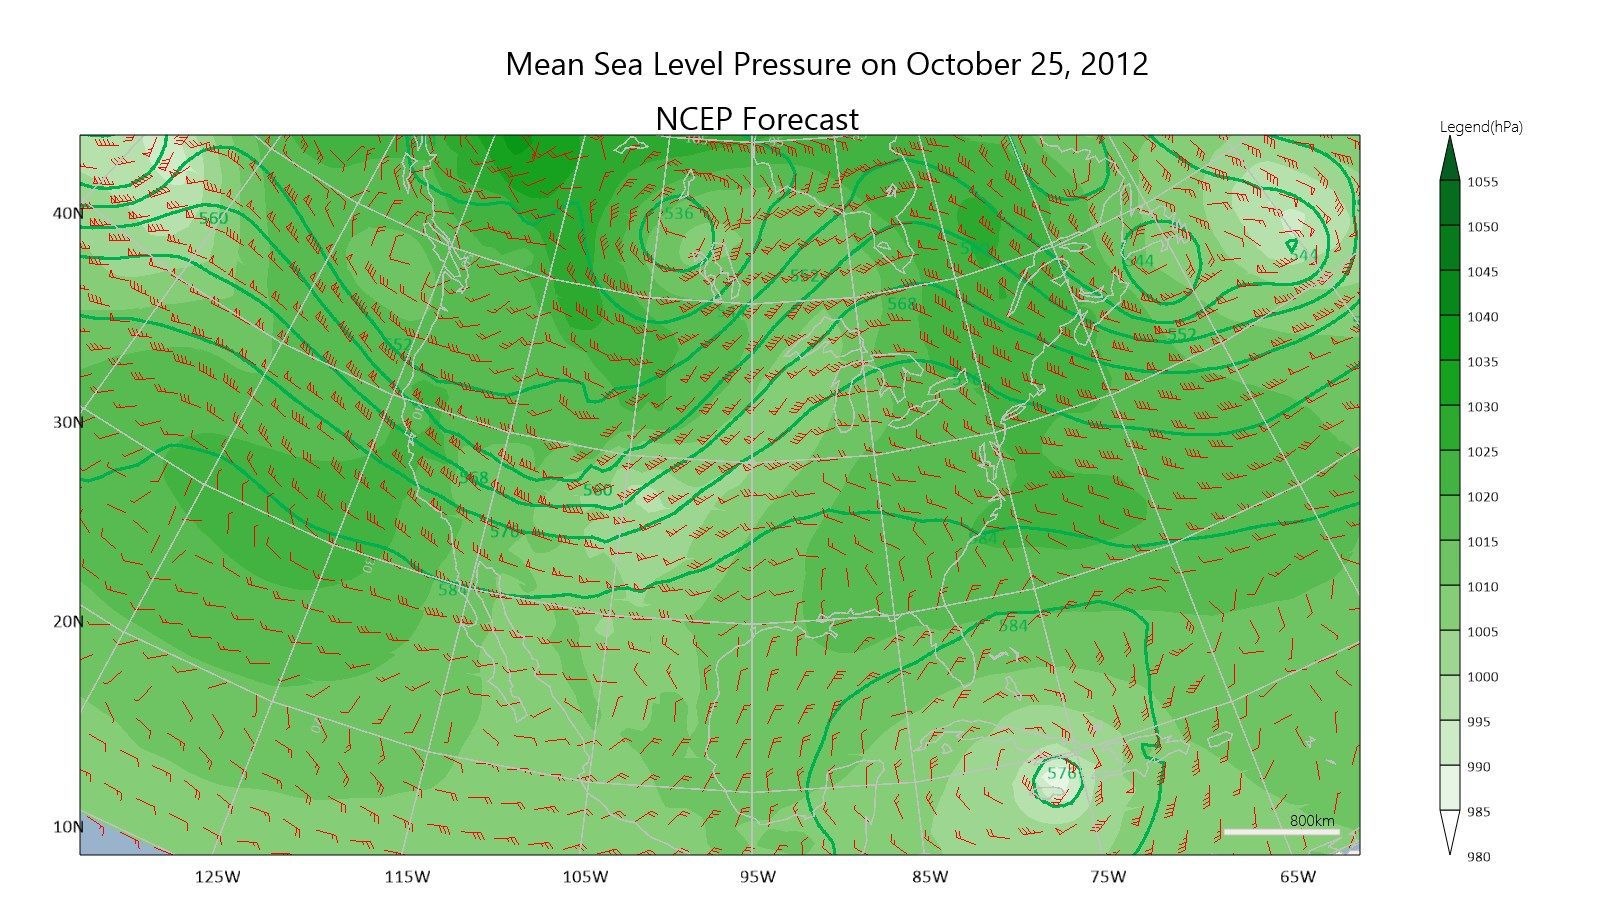 MeteoExplorer Touch shows sea level pressure, 500hPa height, and wind on October 25, 2012, when hurricane Sandy reached its climax.